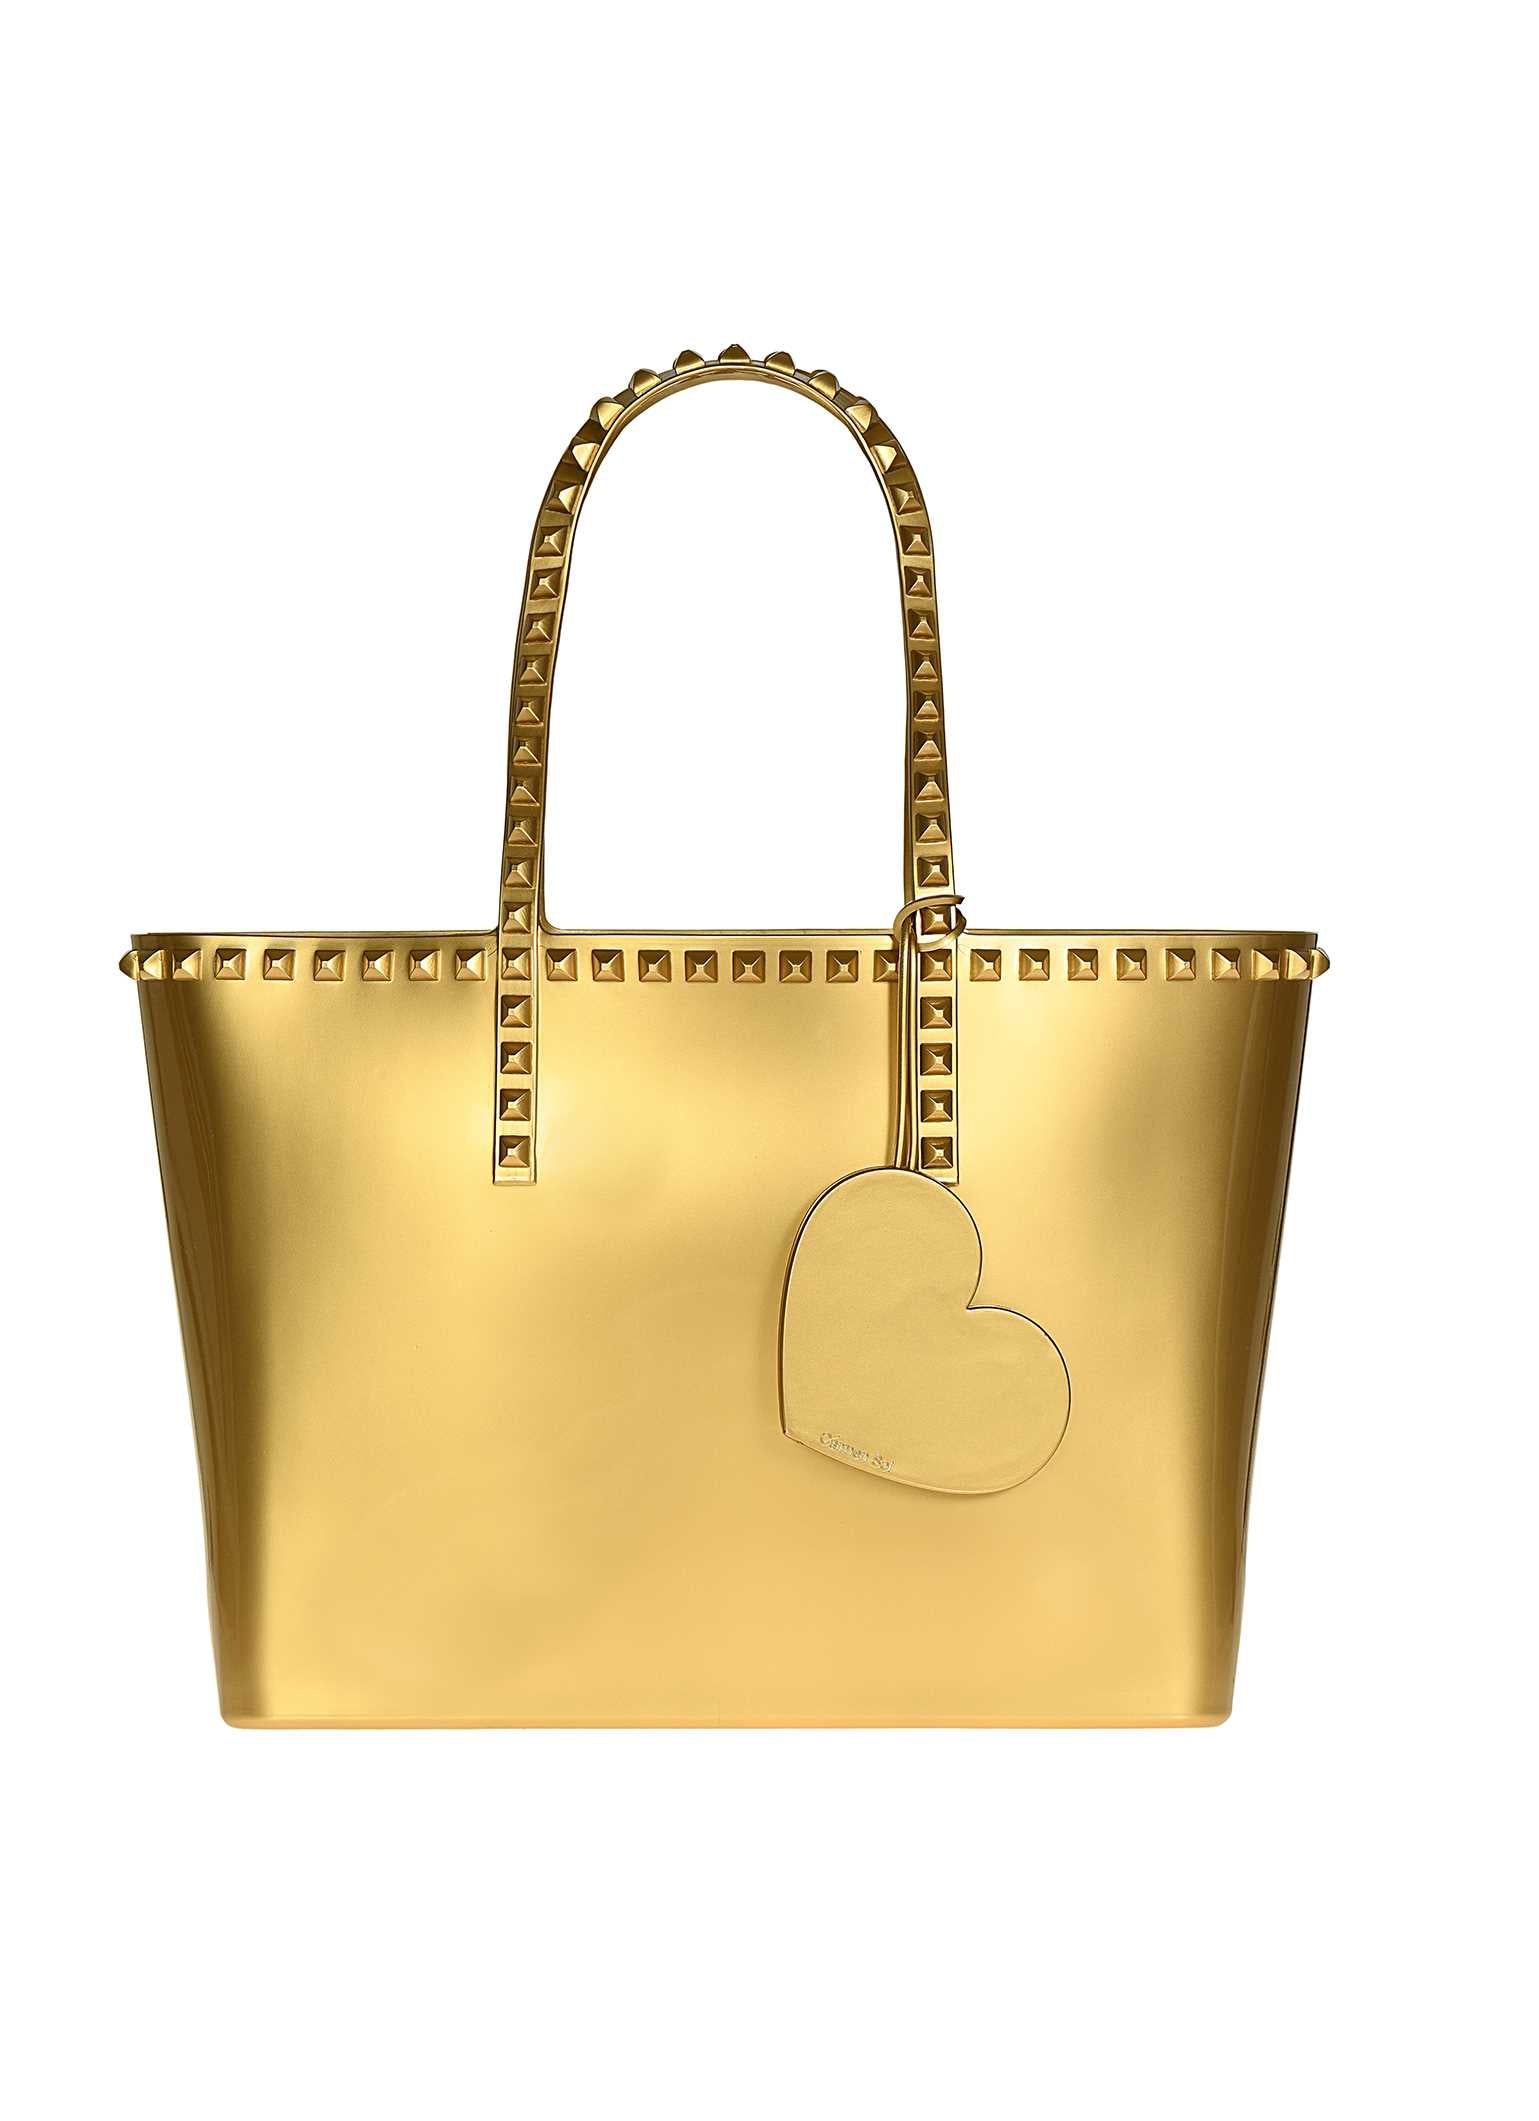 Gold Cuore charm purses personalized with Carmen Sol metallic jelly bags